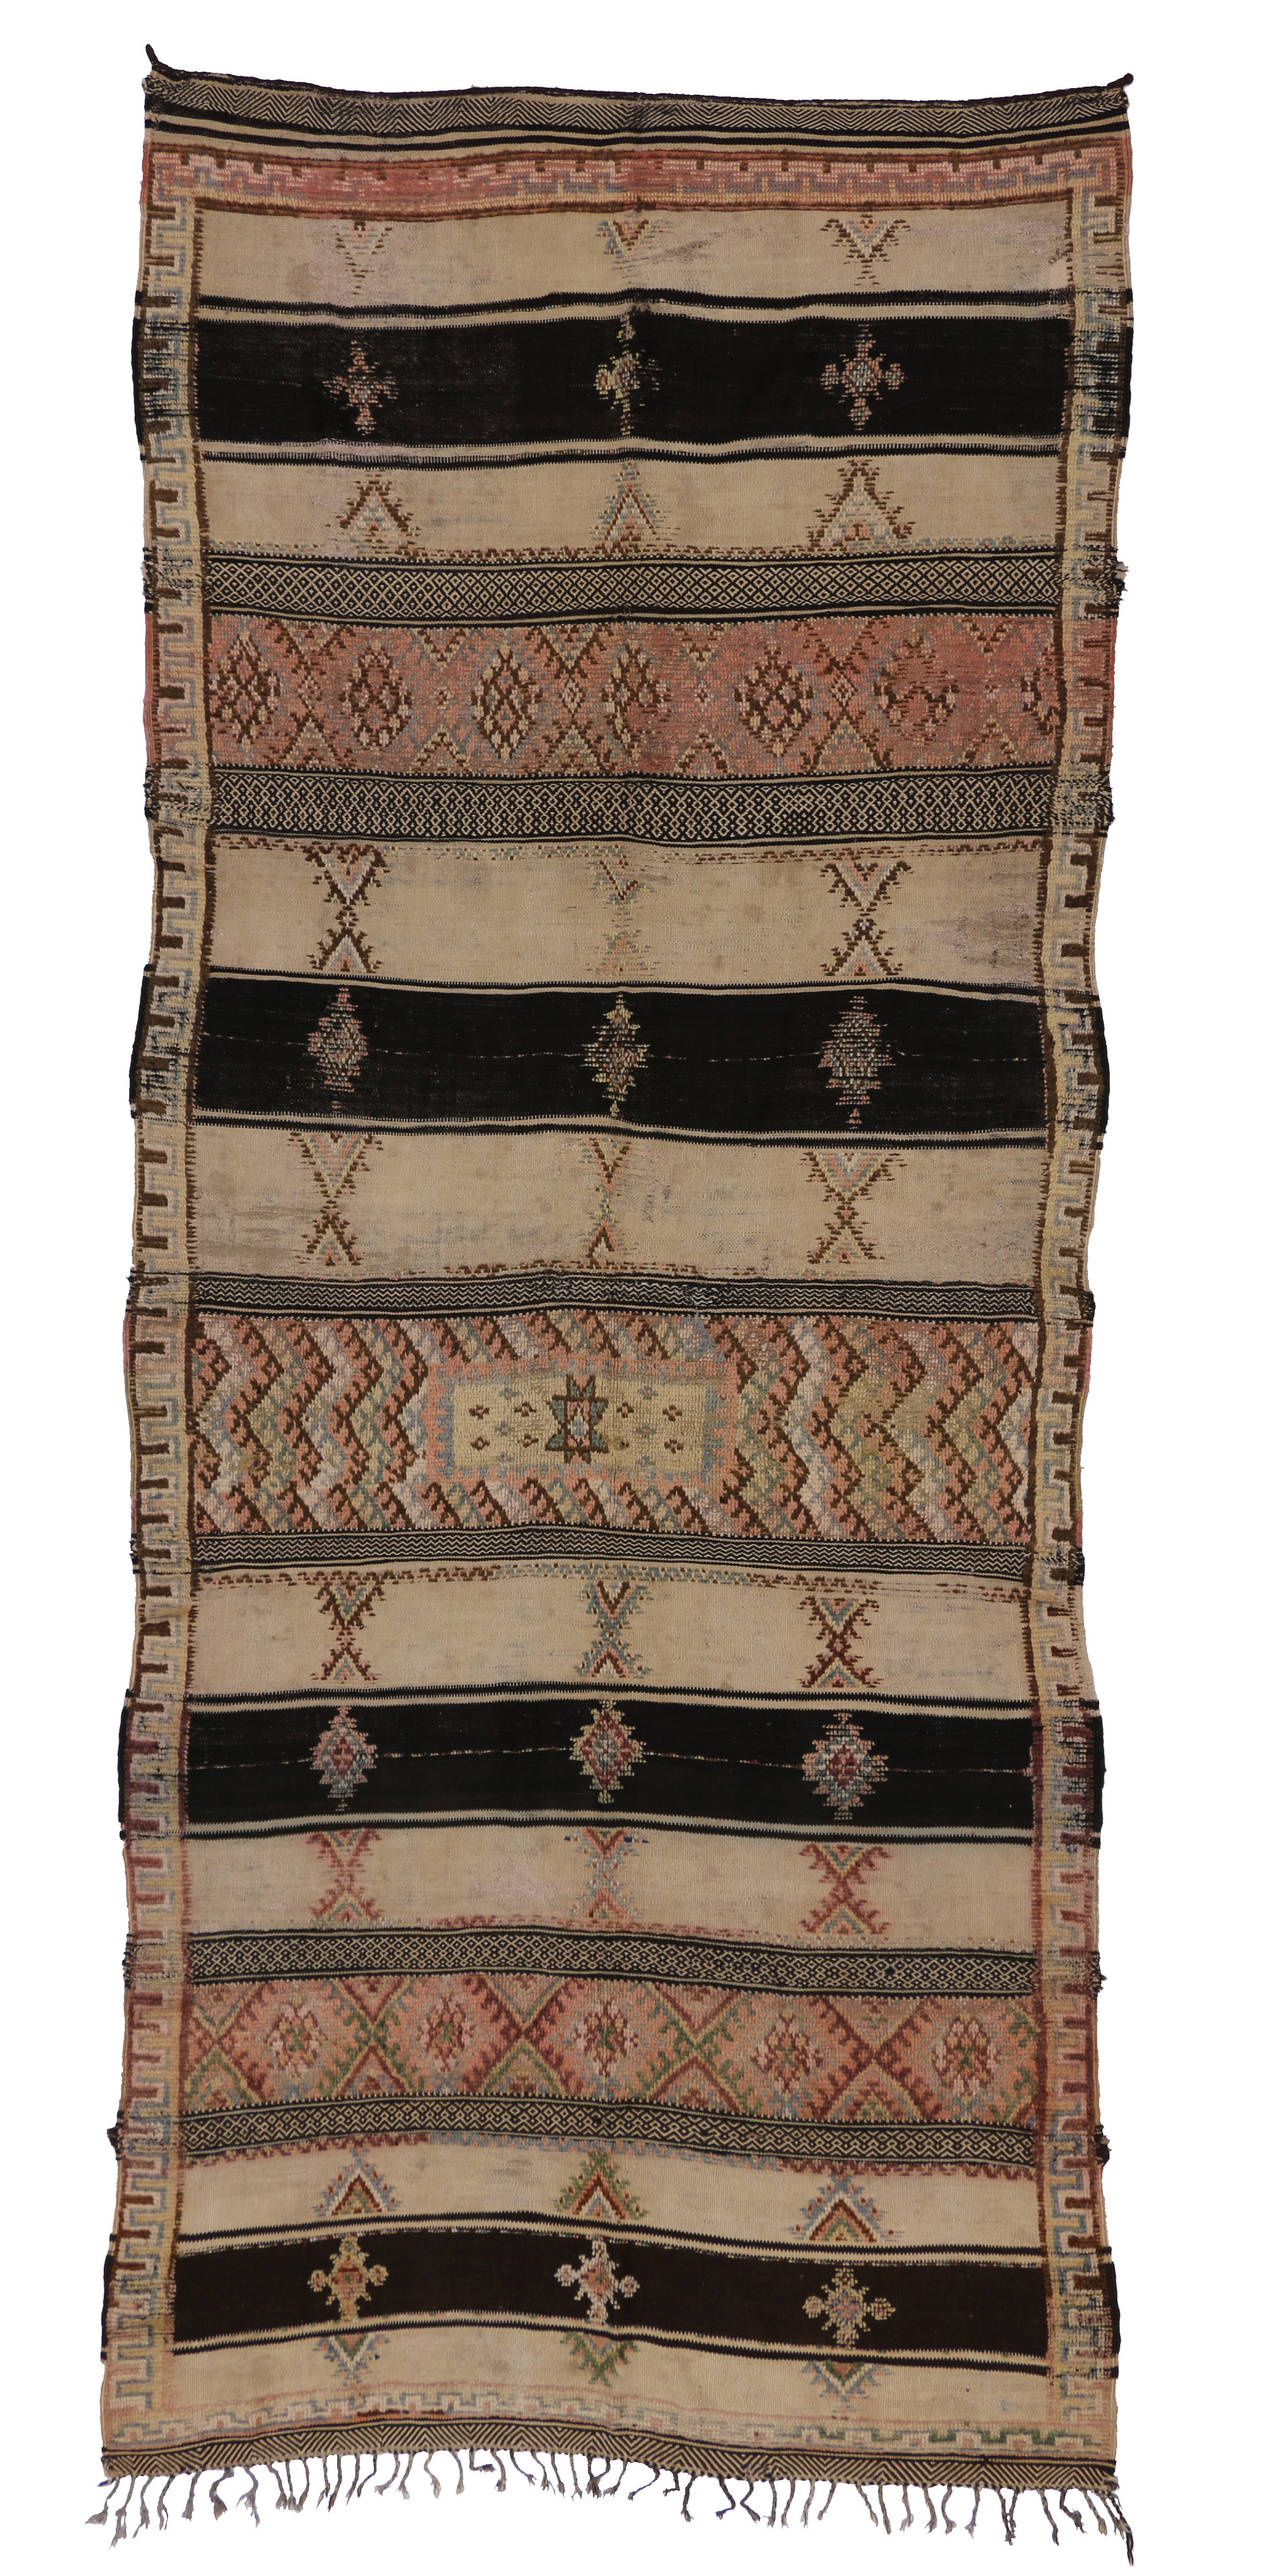 The Berber women incorporate design elements from their personal experience into the rugs designs. The symbols are usually references to events and aspects of their daily life such as beliefs, birth, fertility, nature, femininity, life and